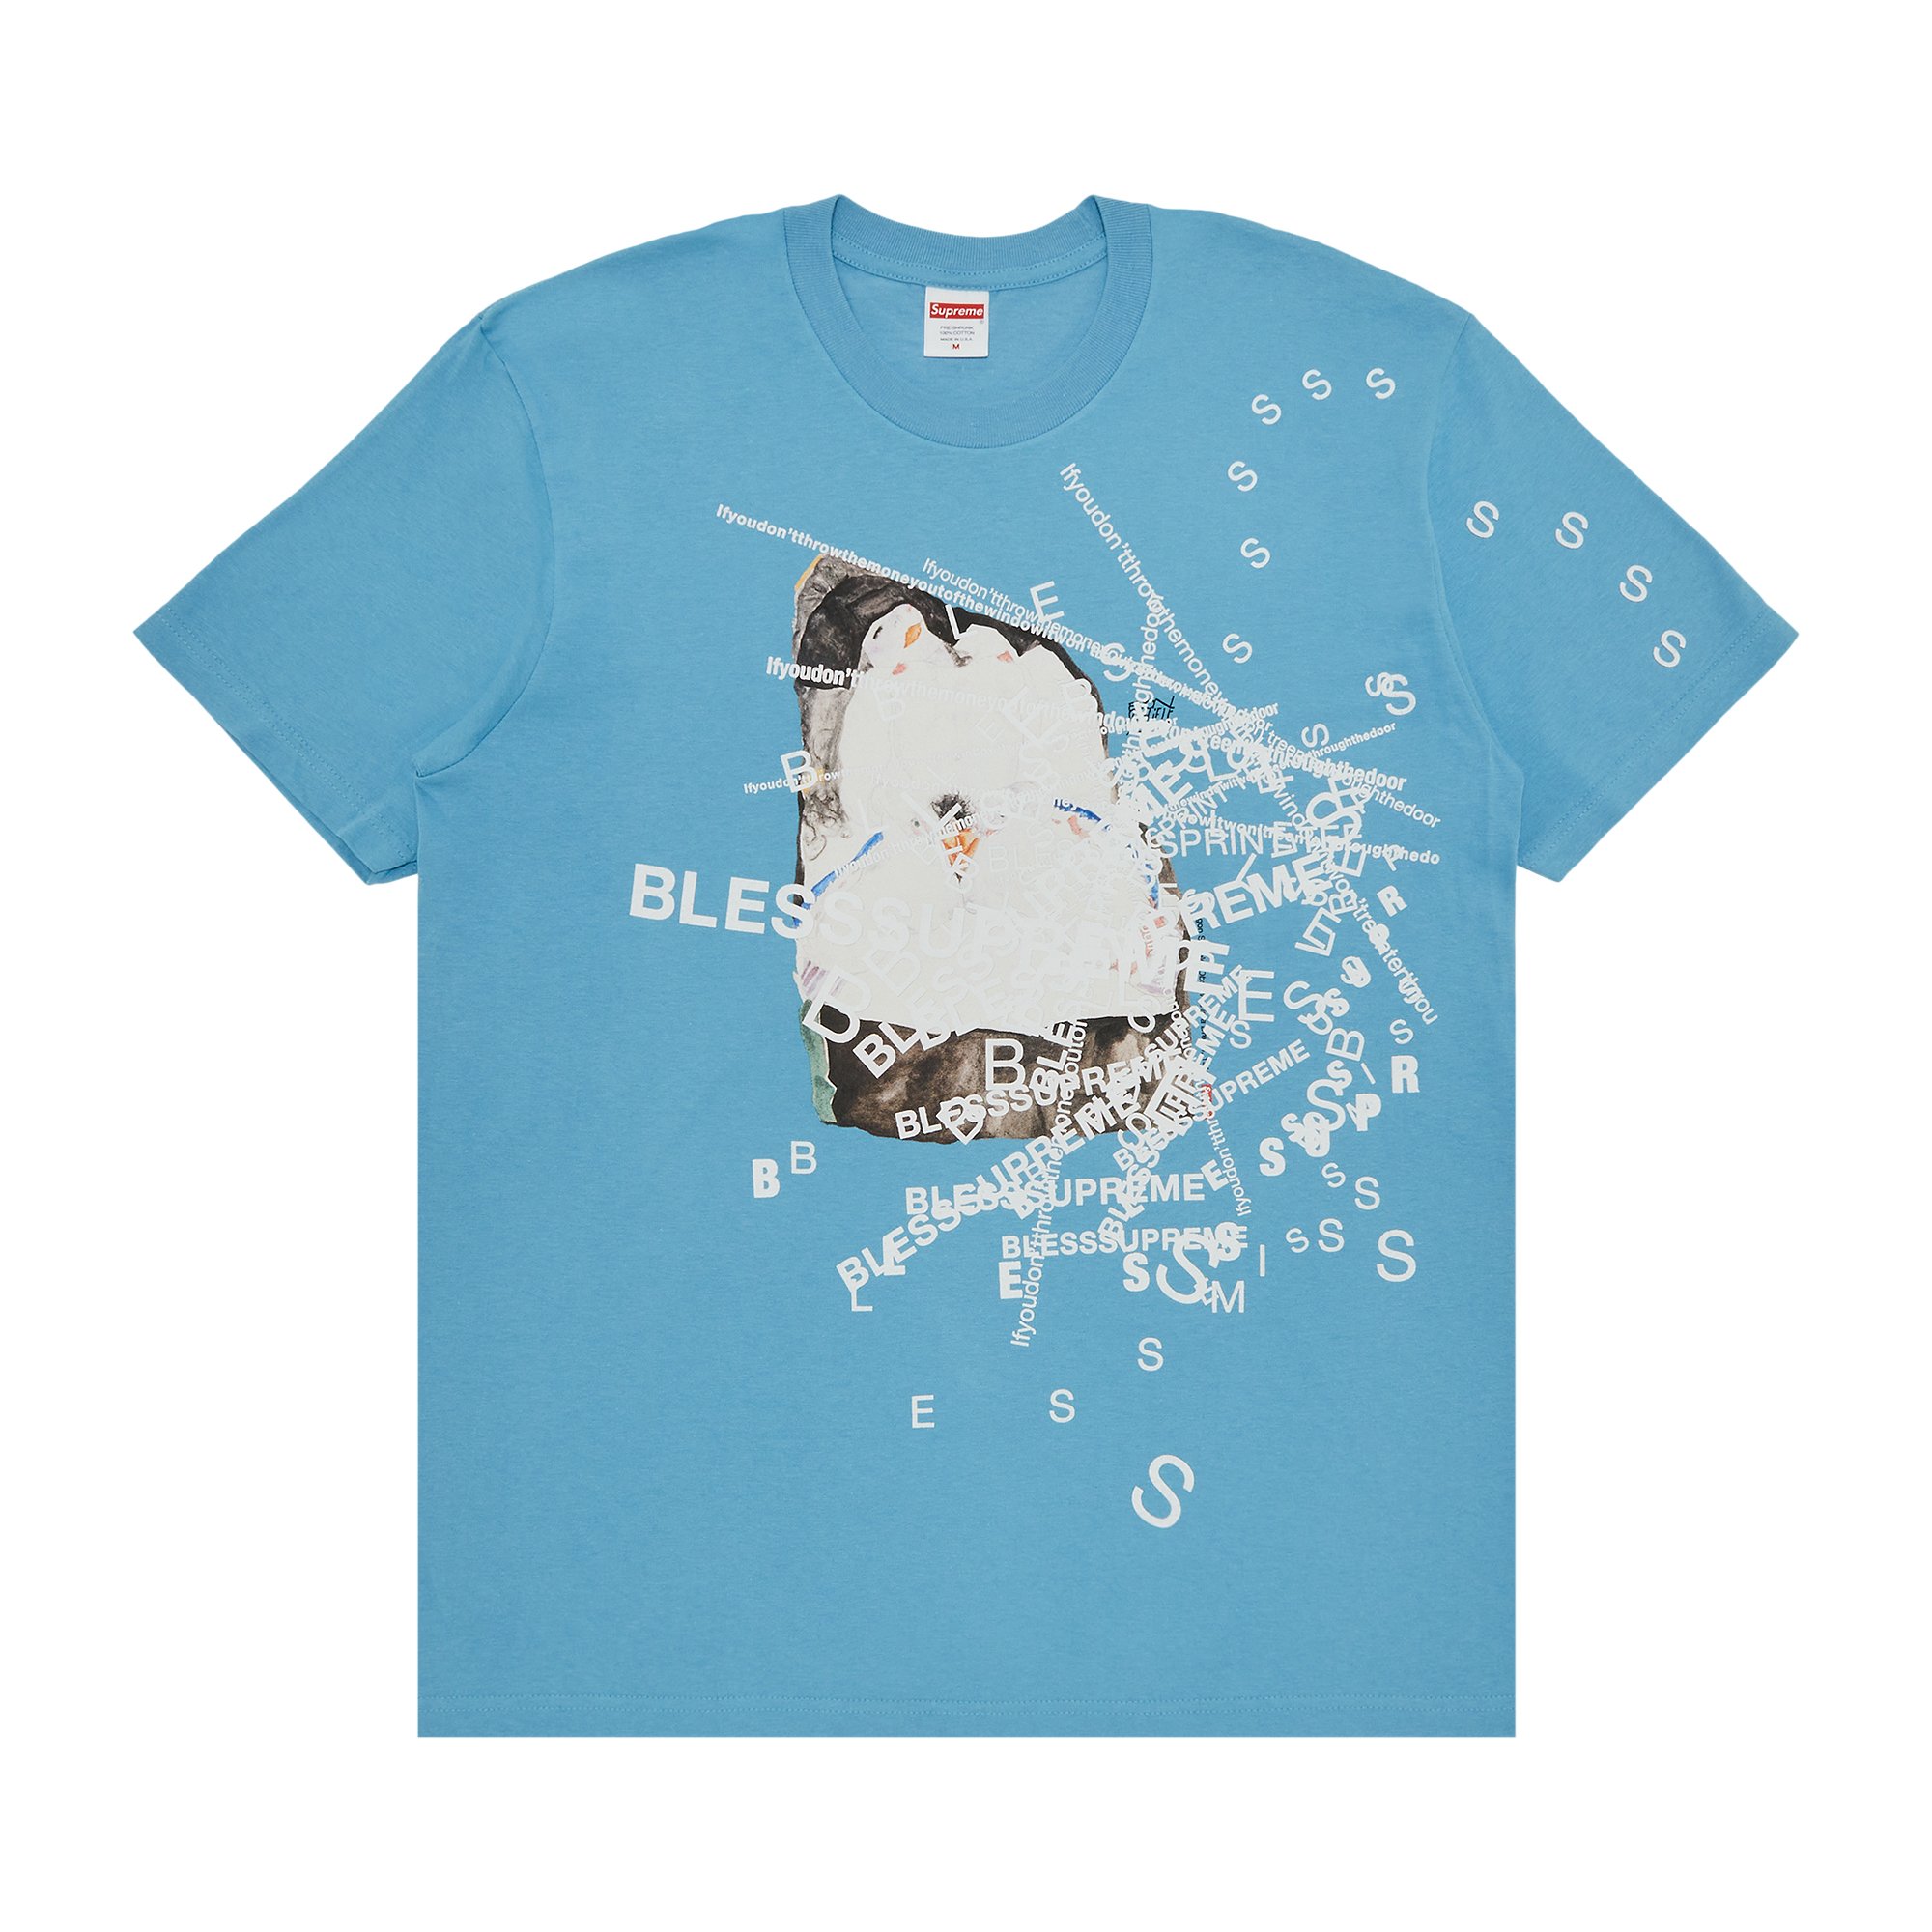 Supreme x Bless Observed In A Dream Tee 'Light Slate'